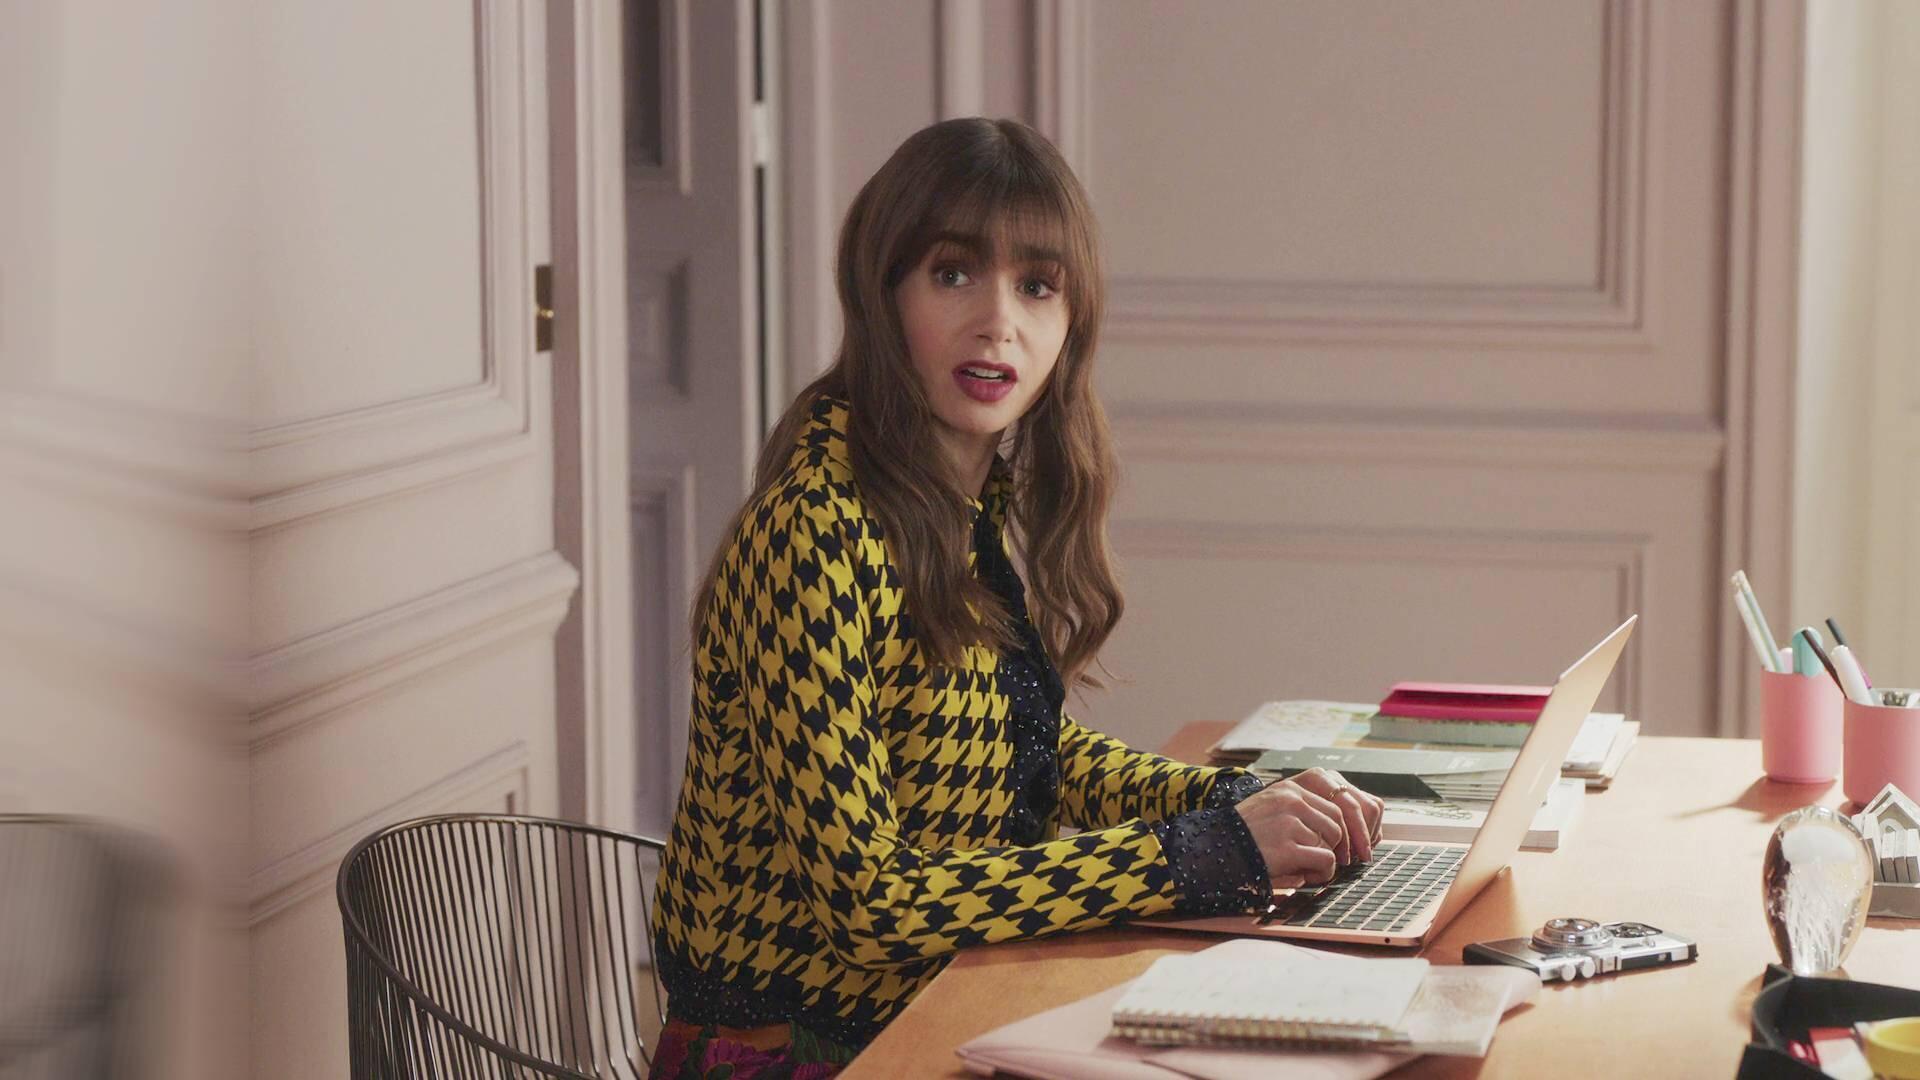 Lily Collins - Emily in Paris | Season 3 Episode 3 | Lily Collins style